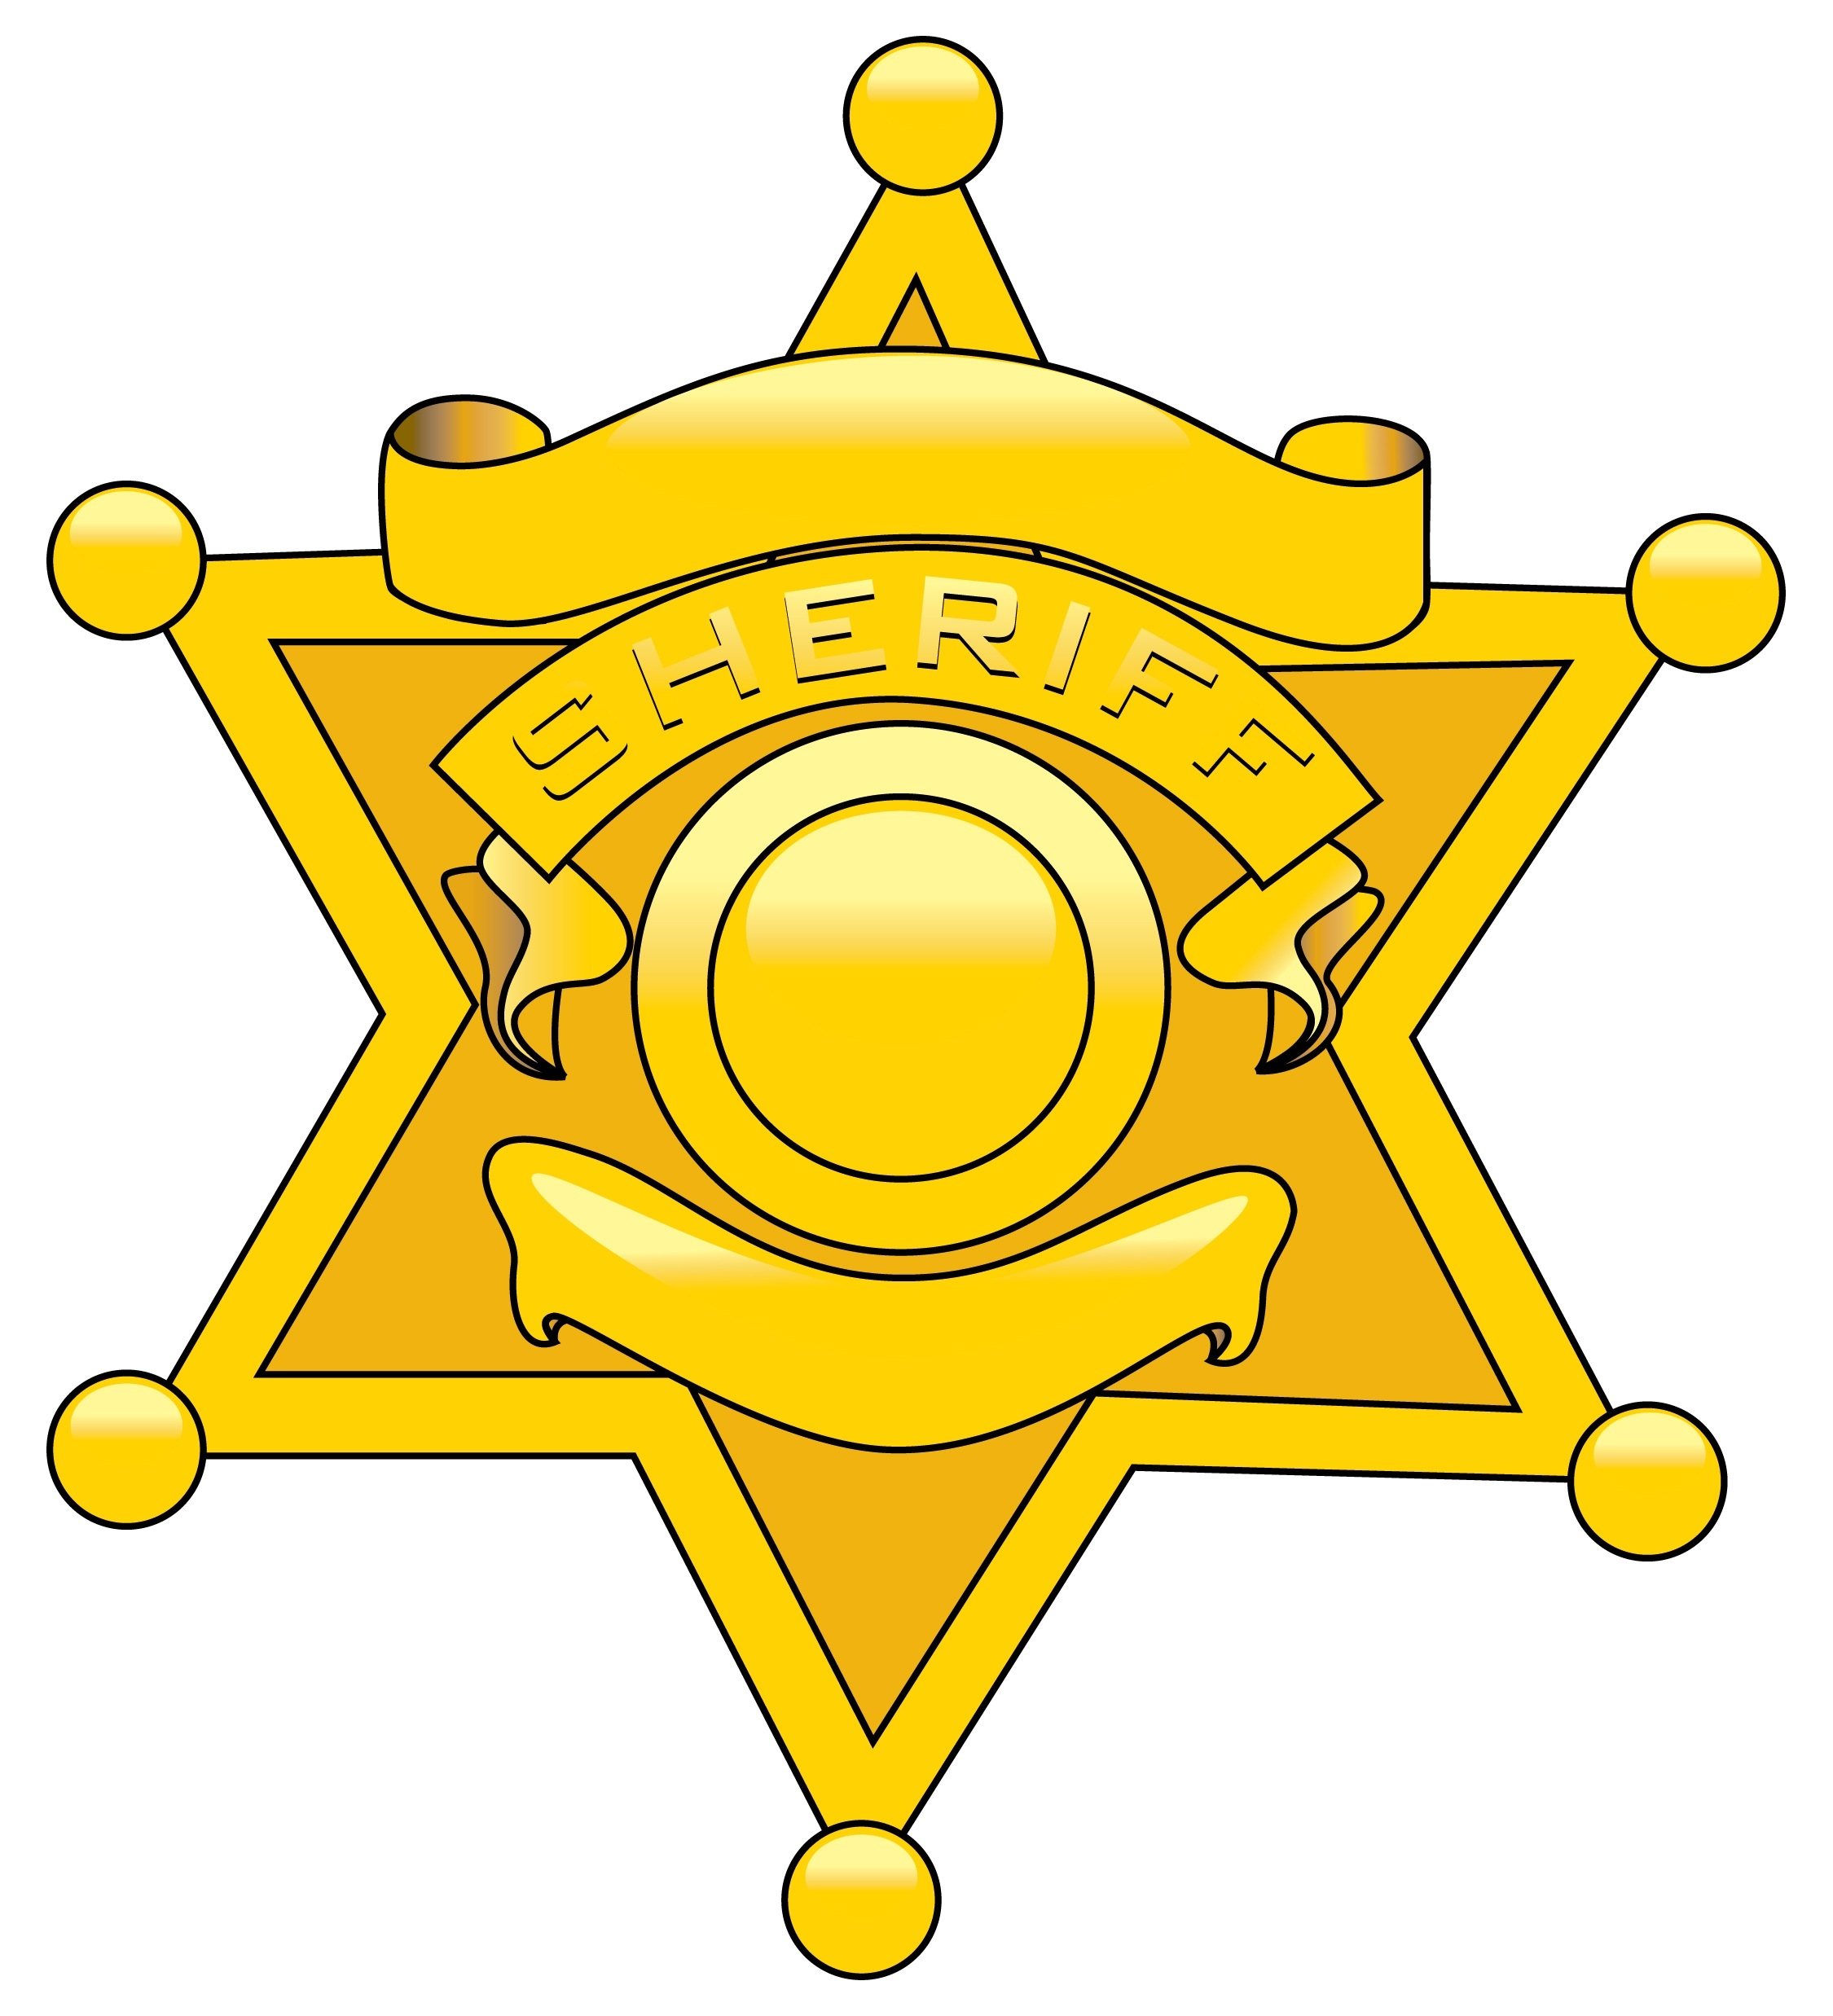 star-sheriff-badges-clipart-2-image-21064